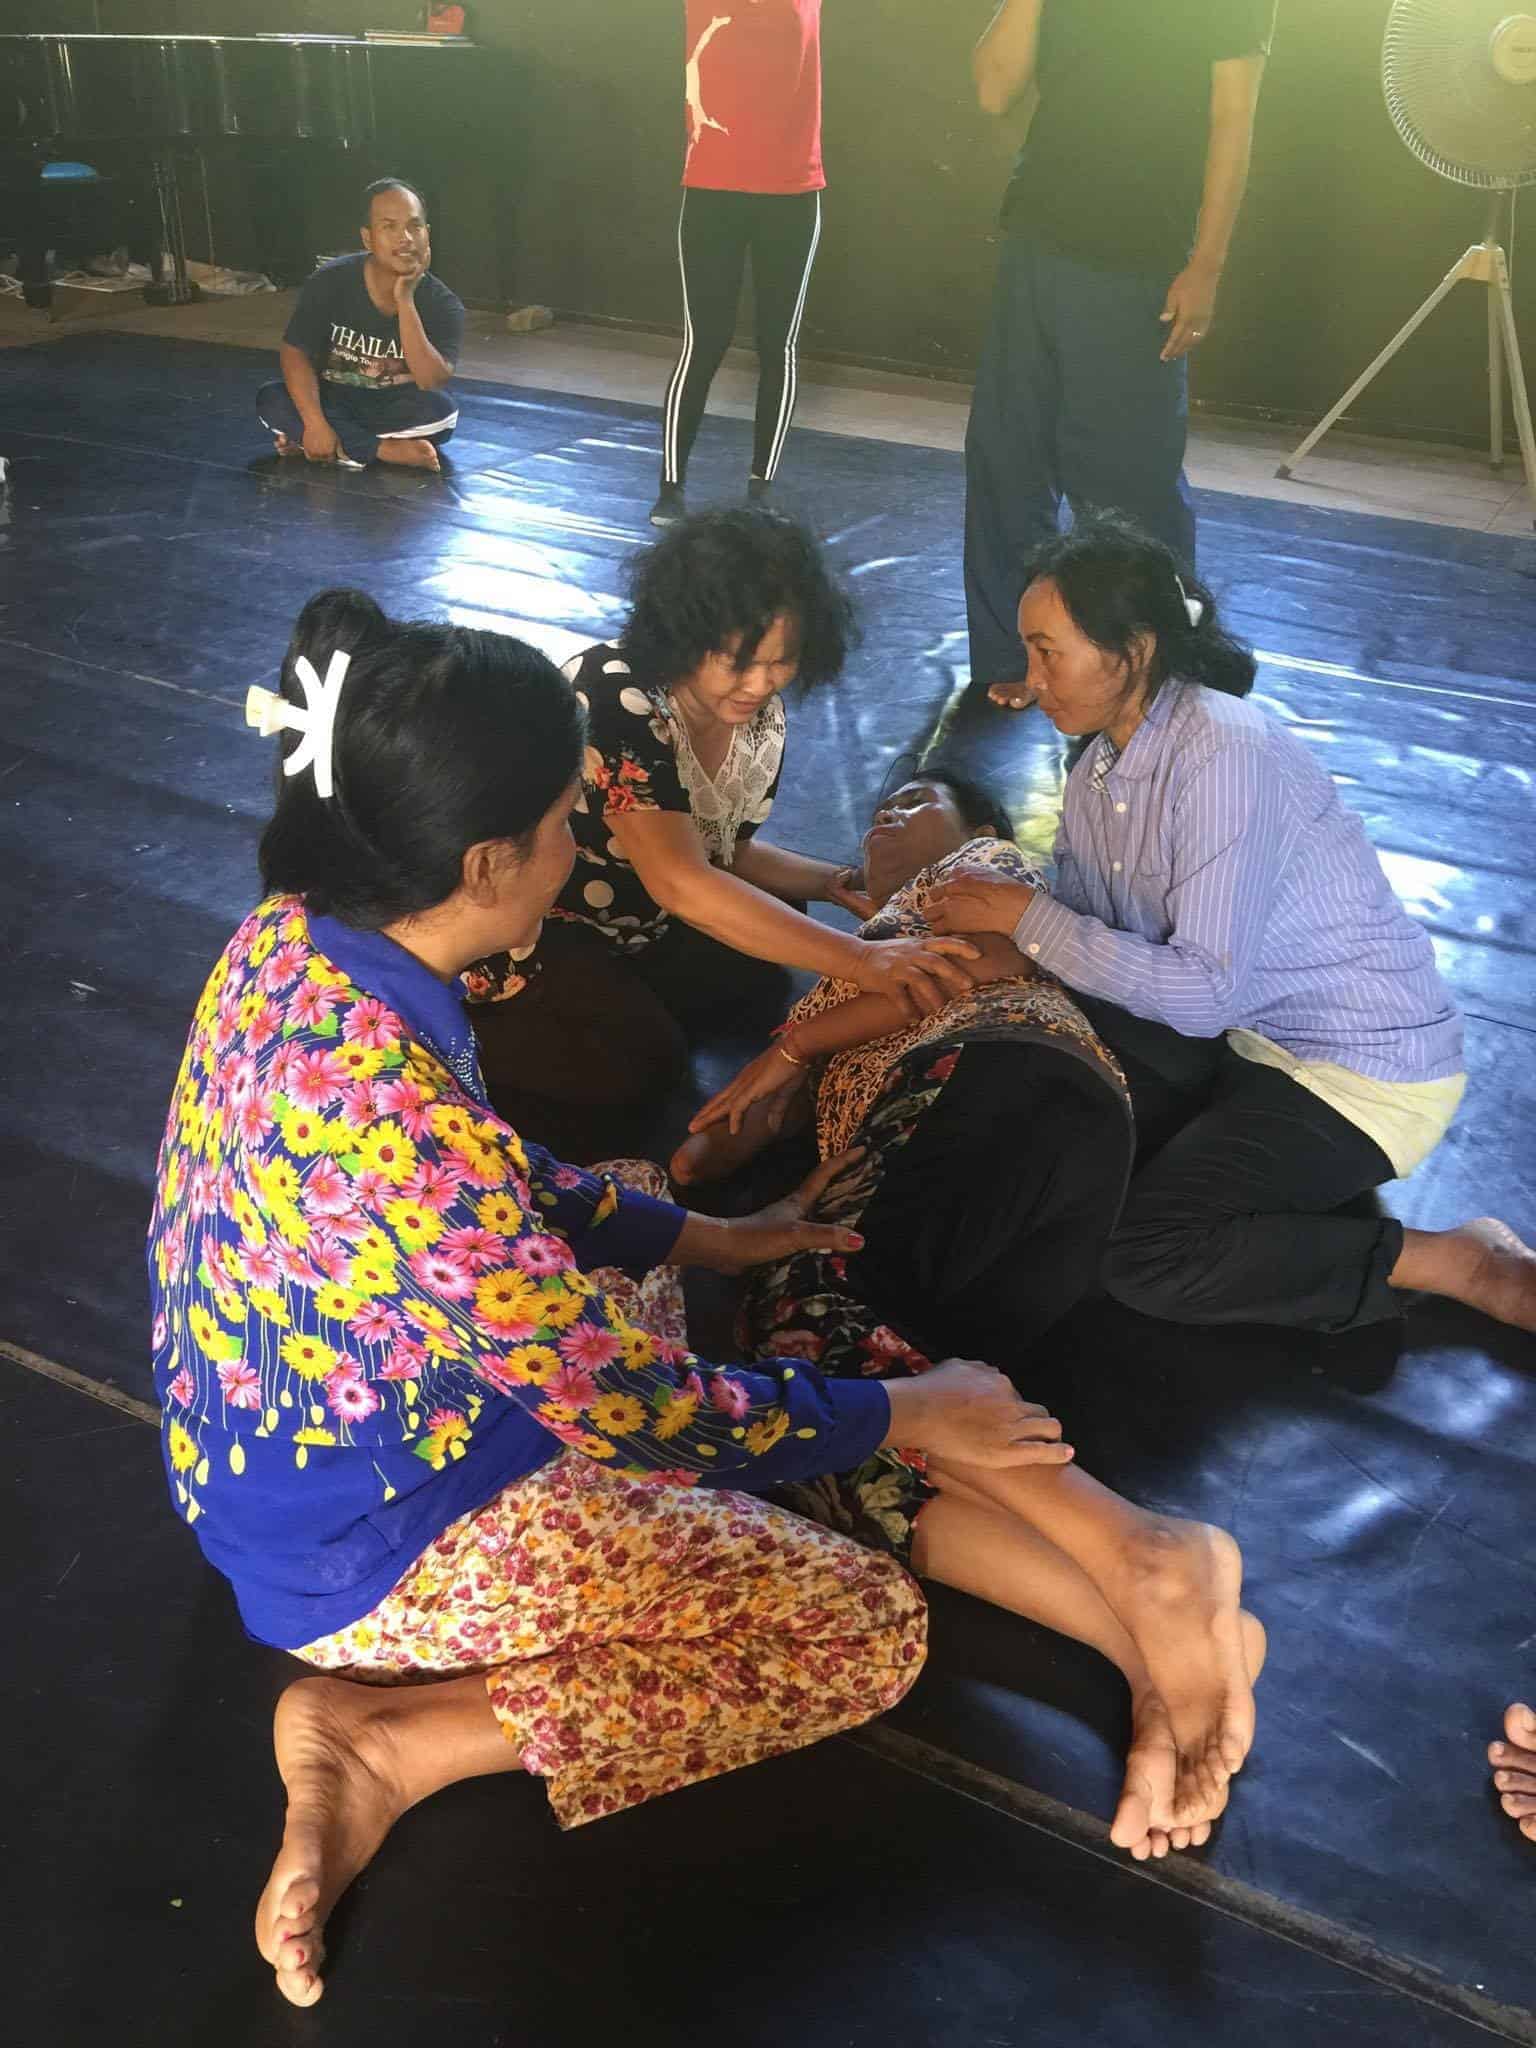 Theater in Cambodia - 3 women seated around another laying on the floor in theater performance